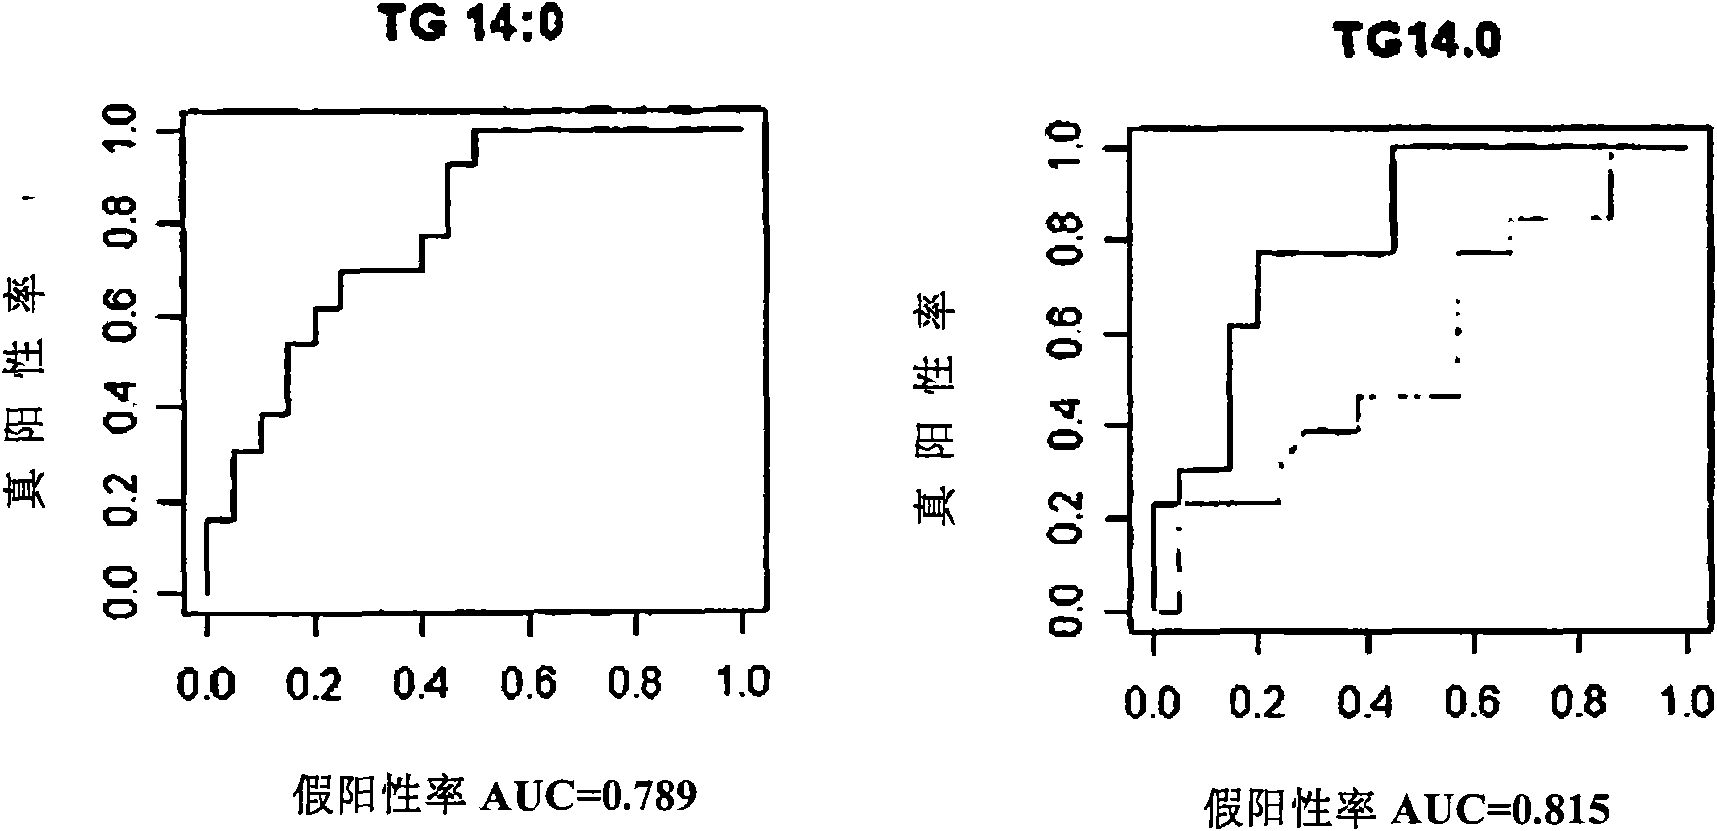 Metabolic markers of diabetic conditions and methods of use thereof